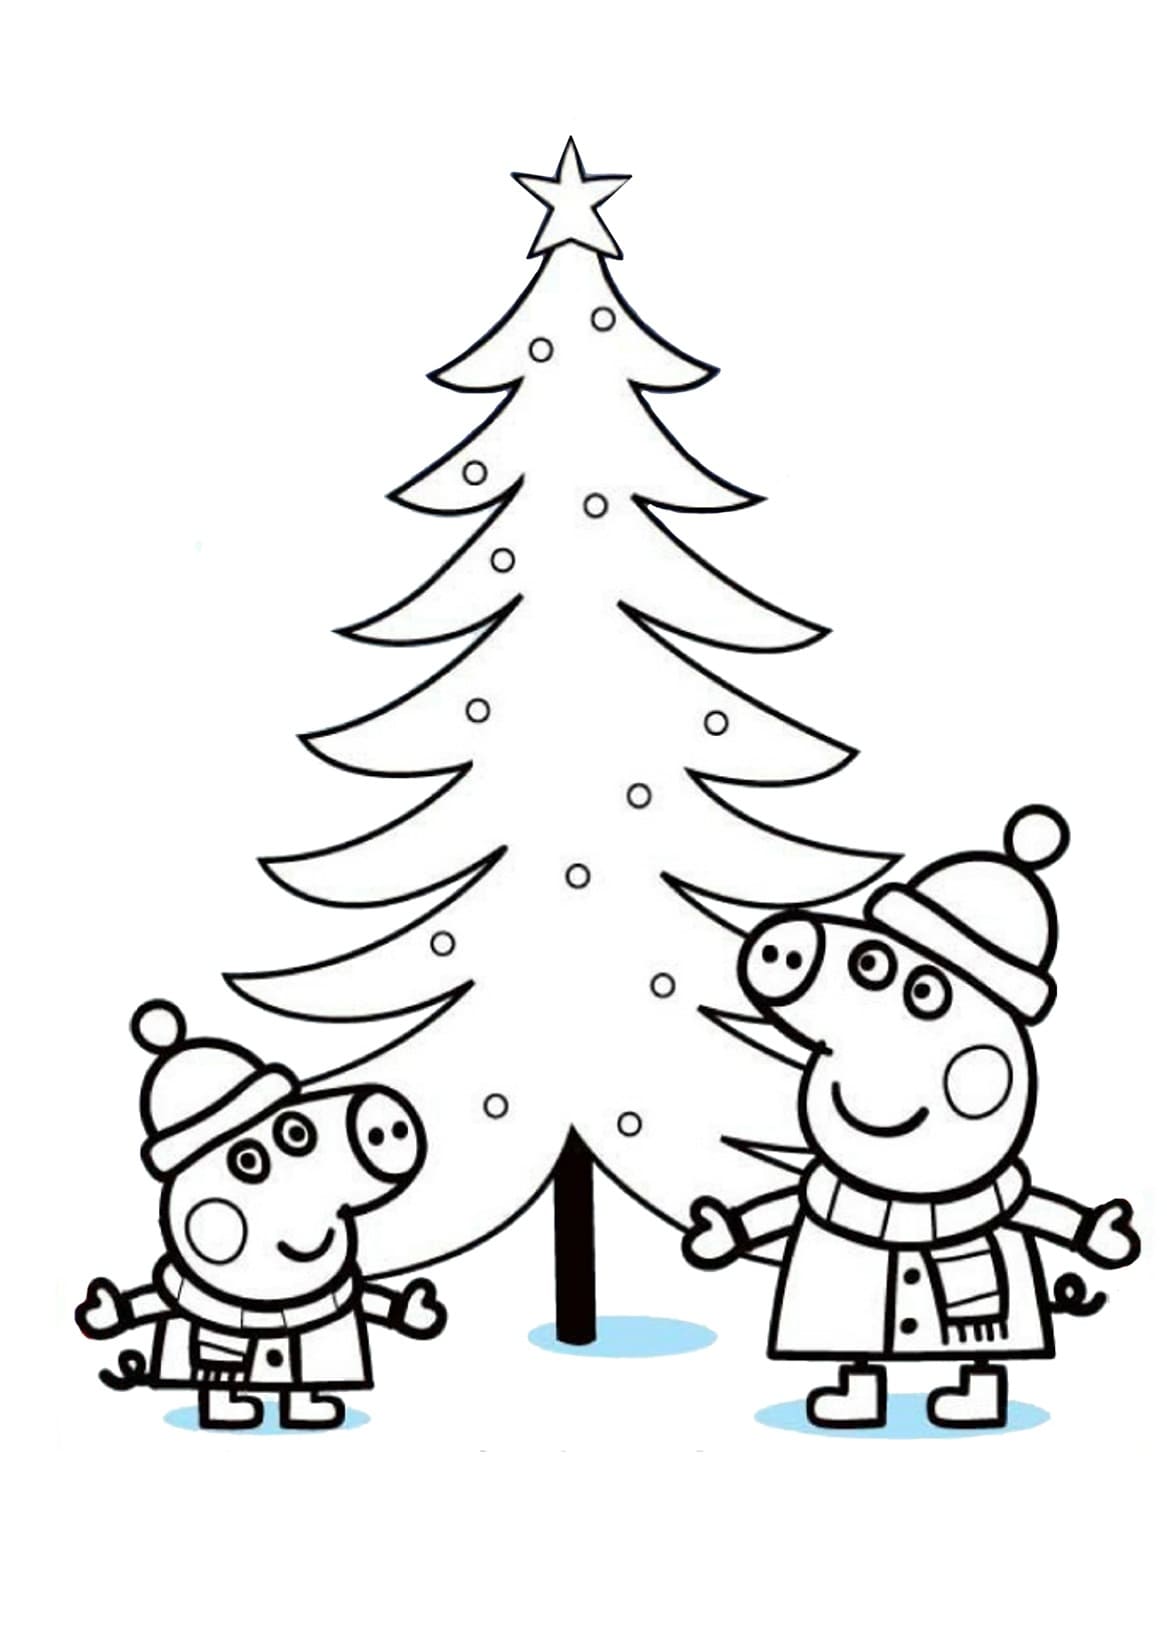 Let’s Decorate The Tree Coloring Page